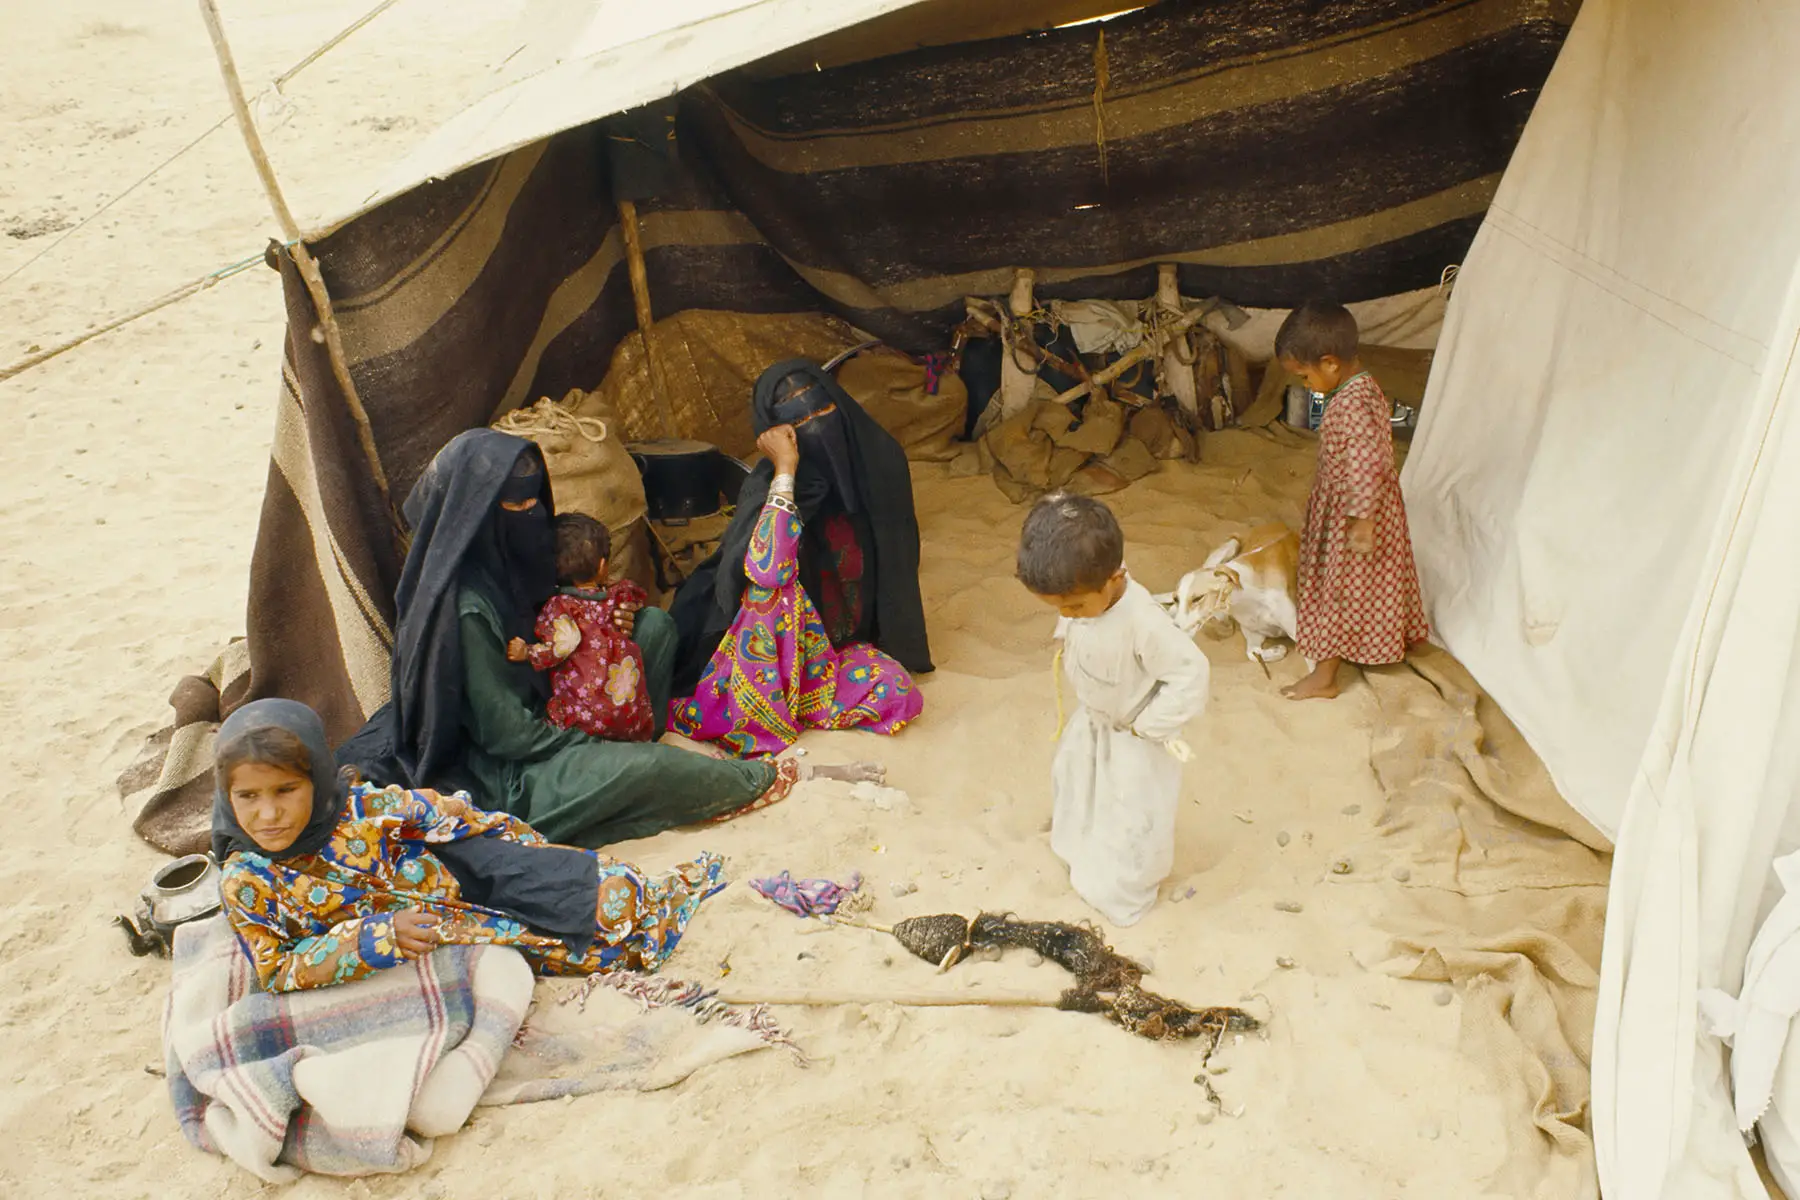 Nomadic Bedouin veiled women and children sitting in entrance of a tent.